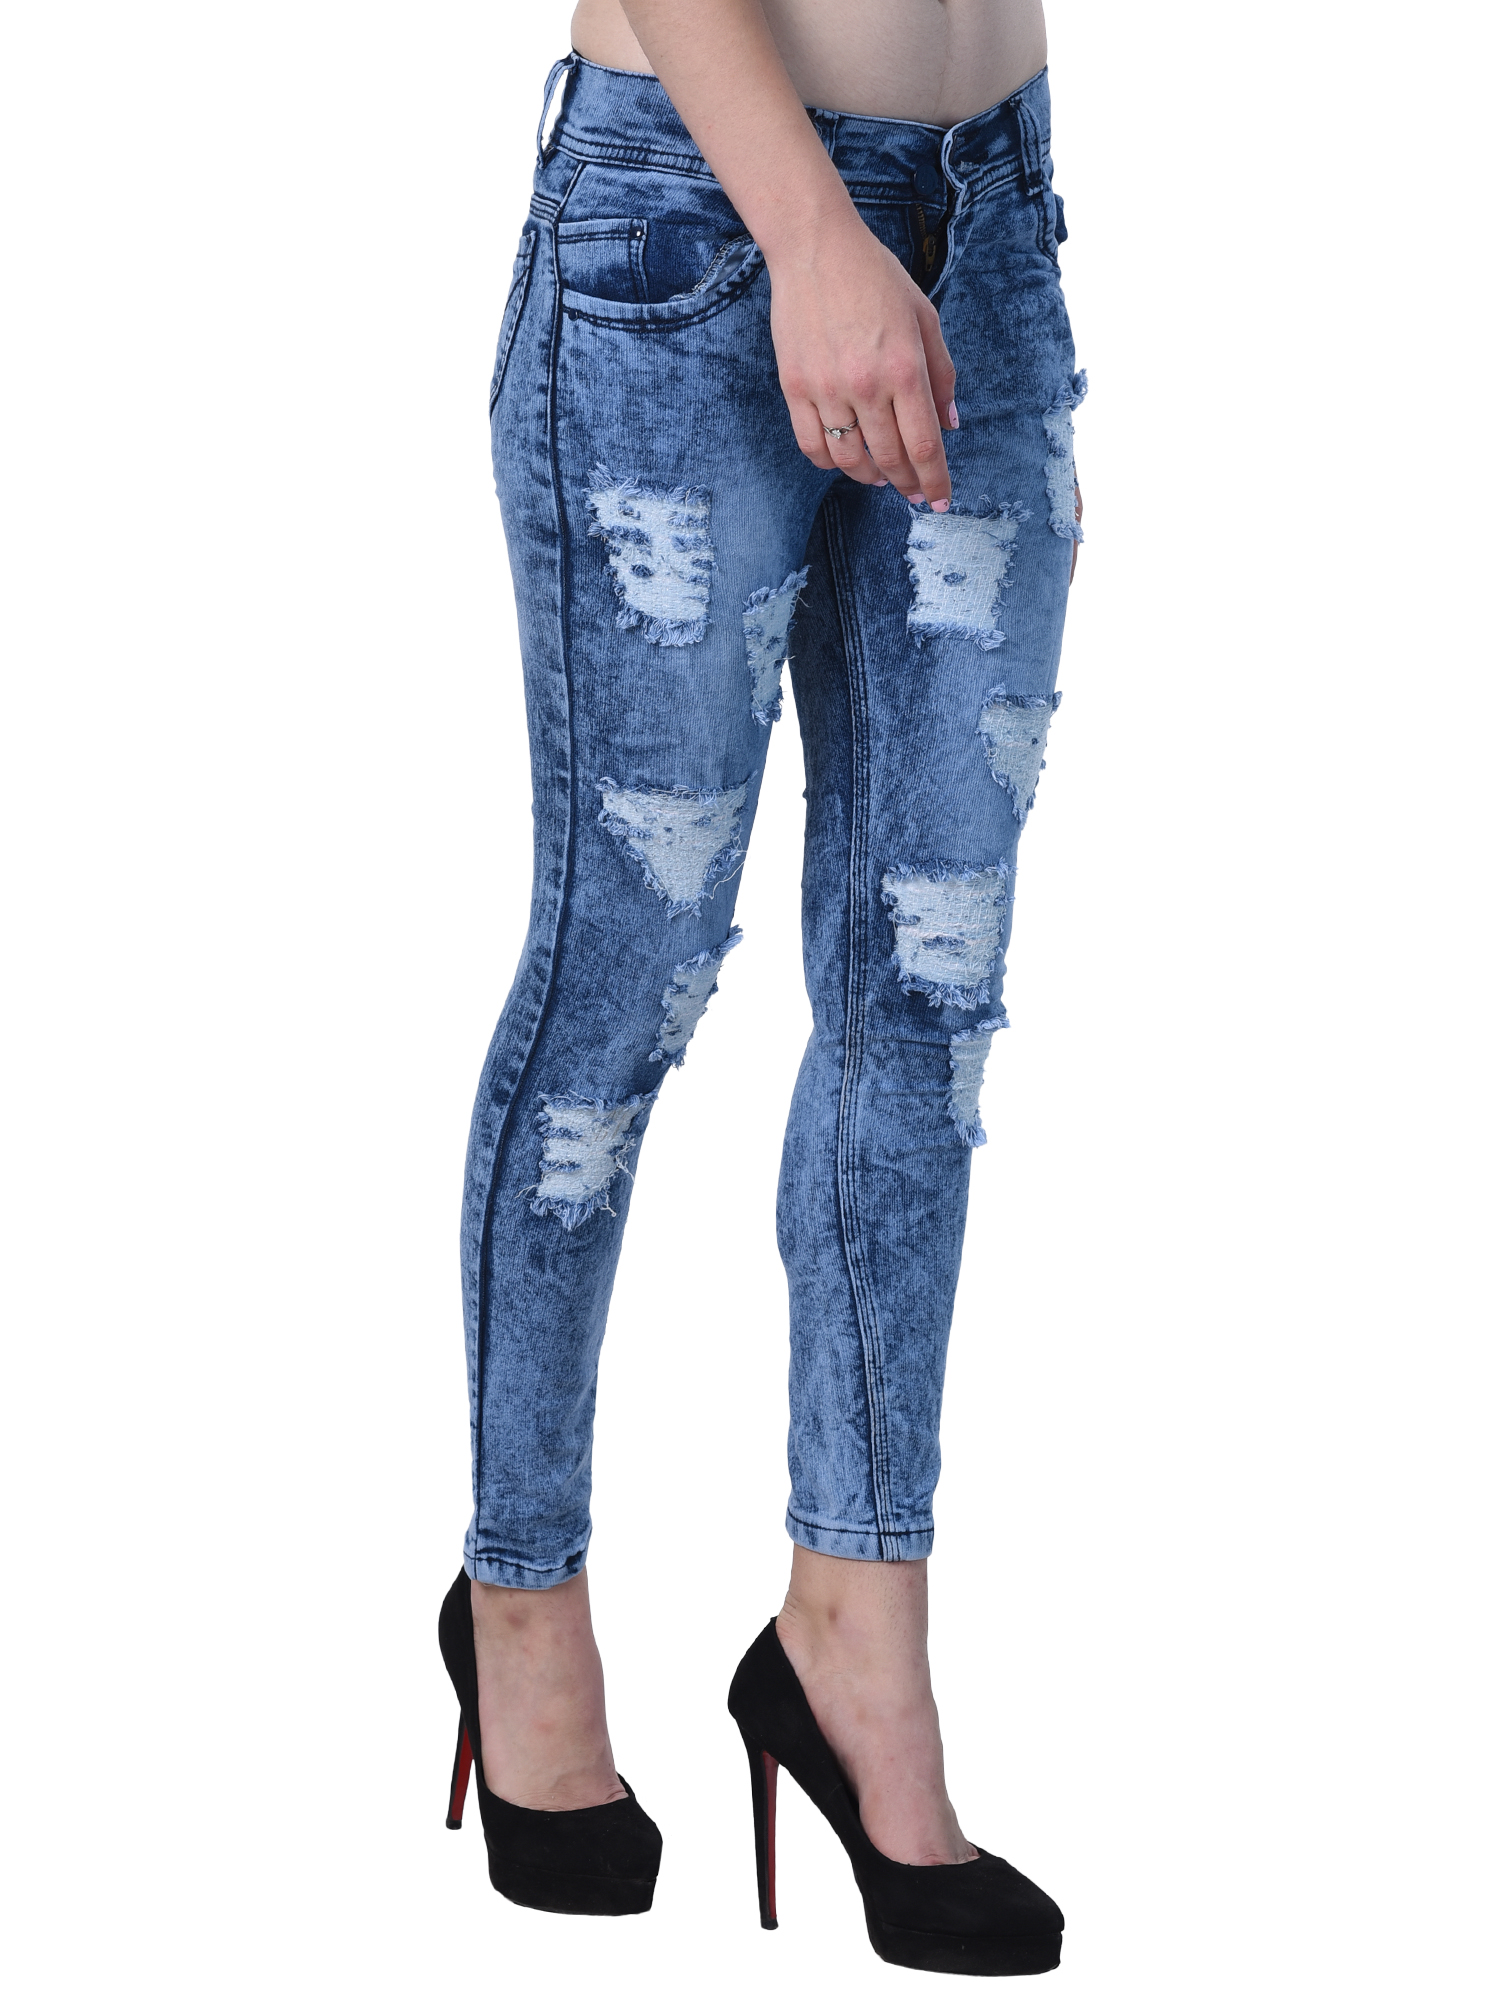 Buy Code Yellow Women's Blue Color Stylish Ripped Jeans Online @ ₹899 ...